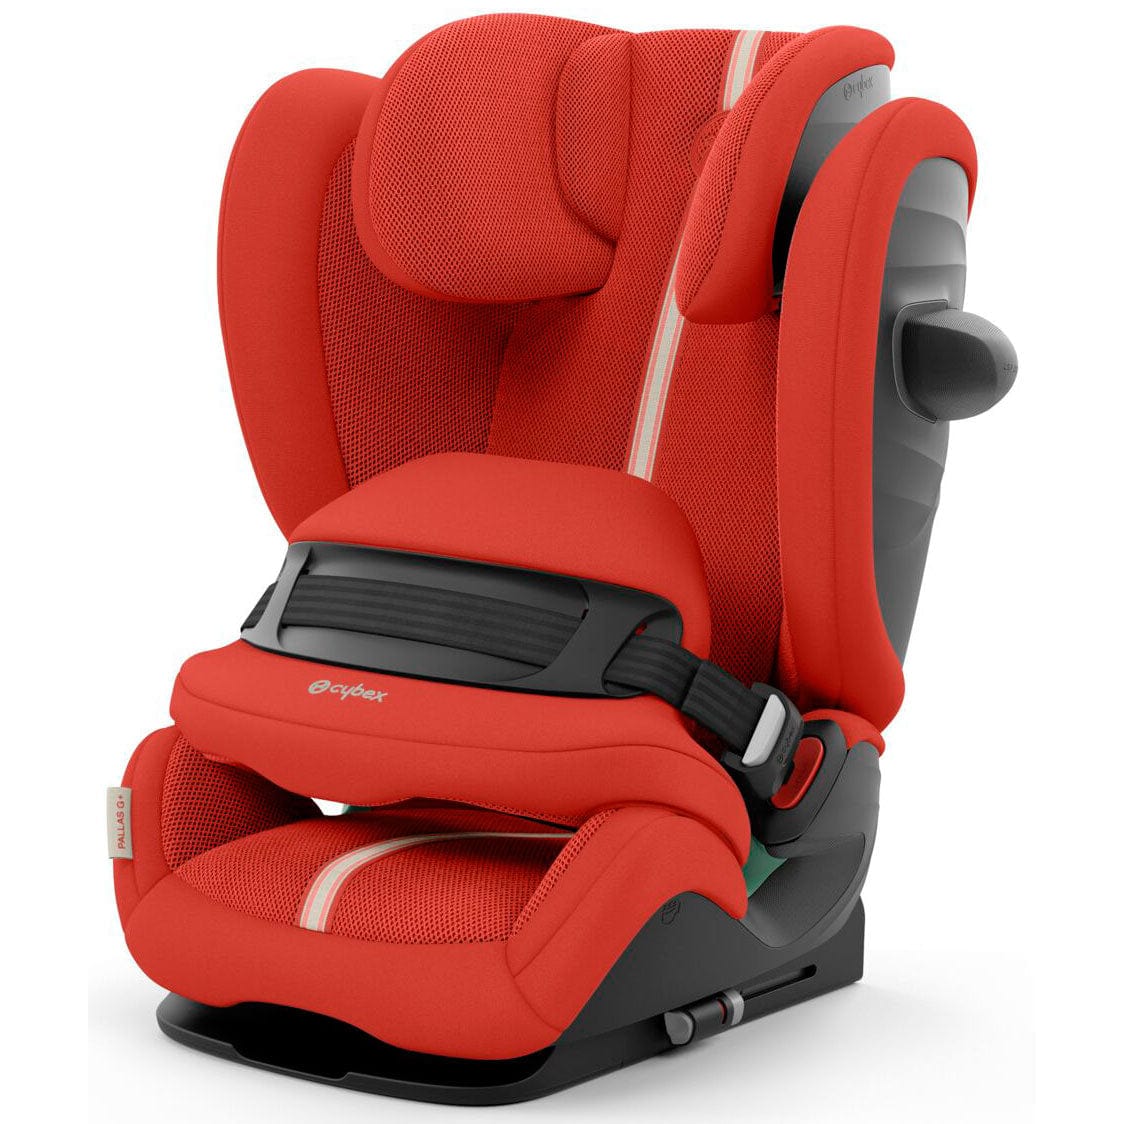 Cybex Pallas G i-Size Plus in Hibiscus Red Combination Car Seats